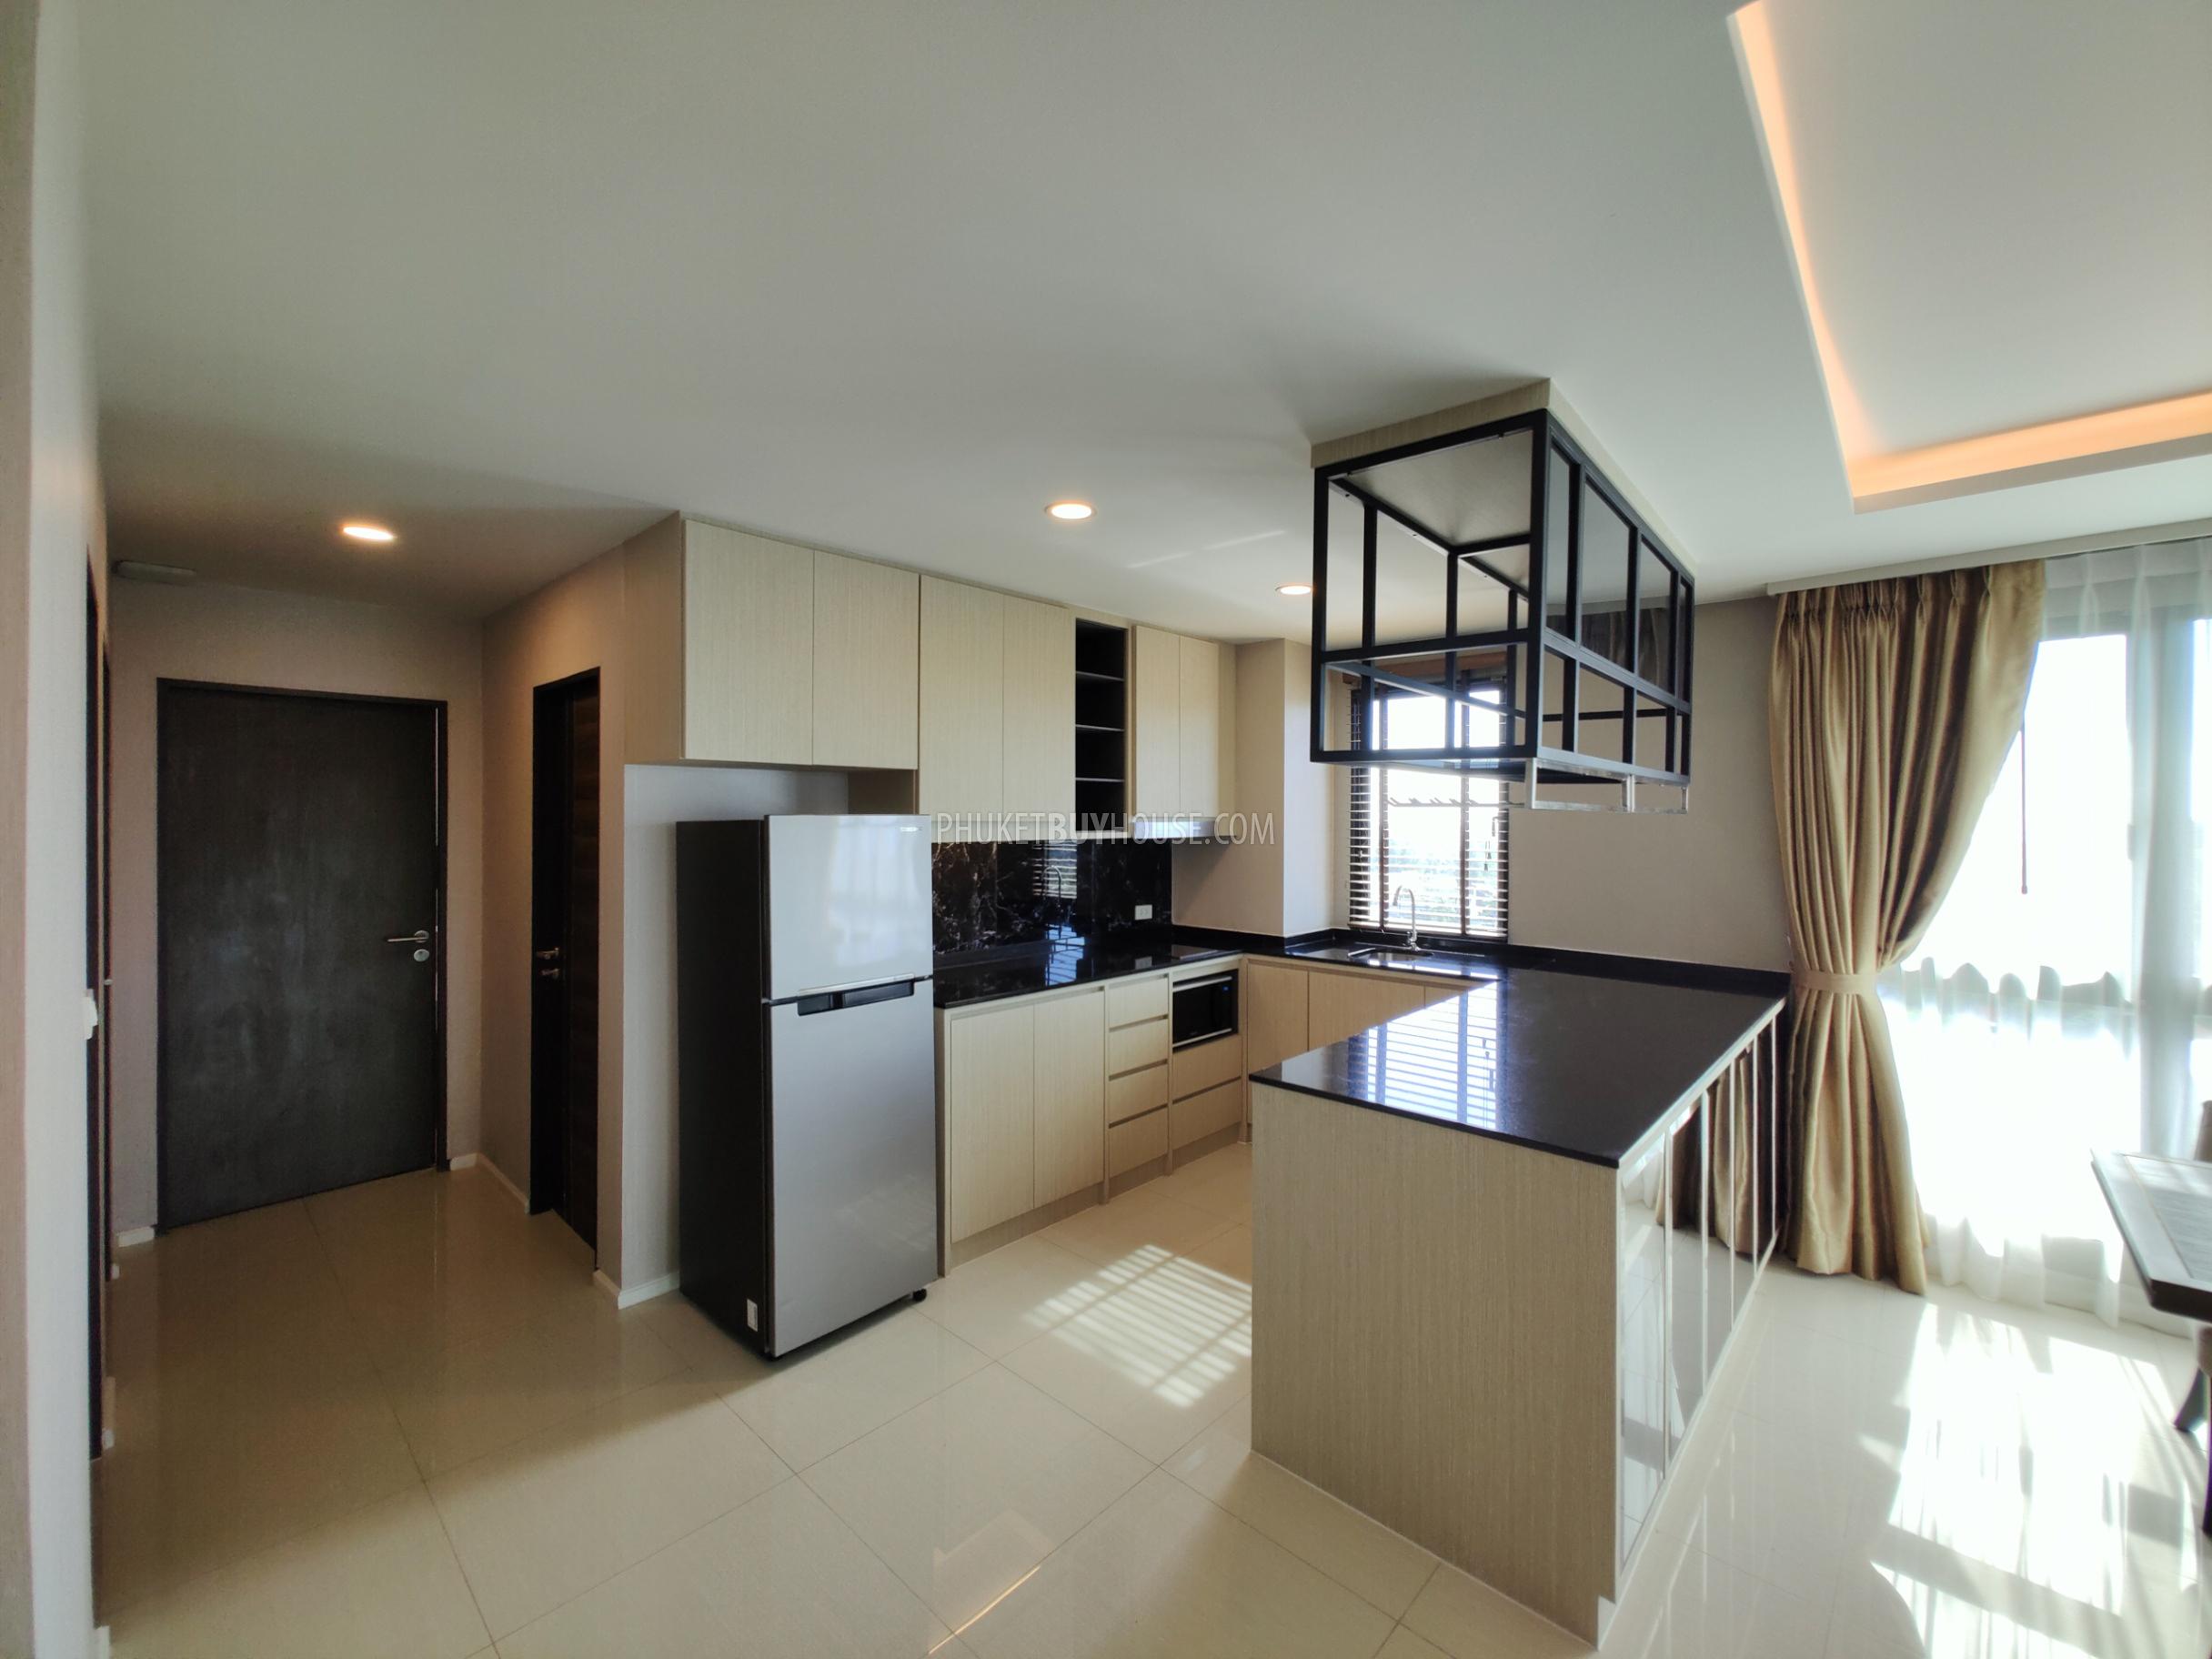 SUR22000: Irresistible Panoramic View from This Three Bedroom Apartment in Surin. Photo #3